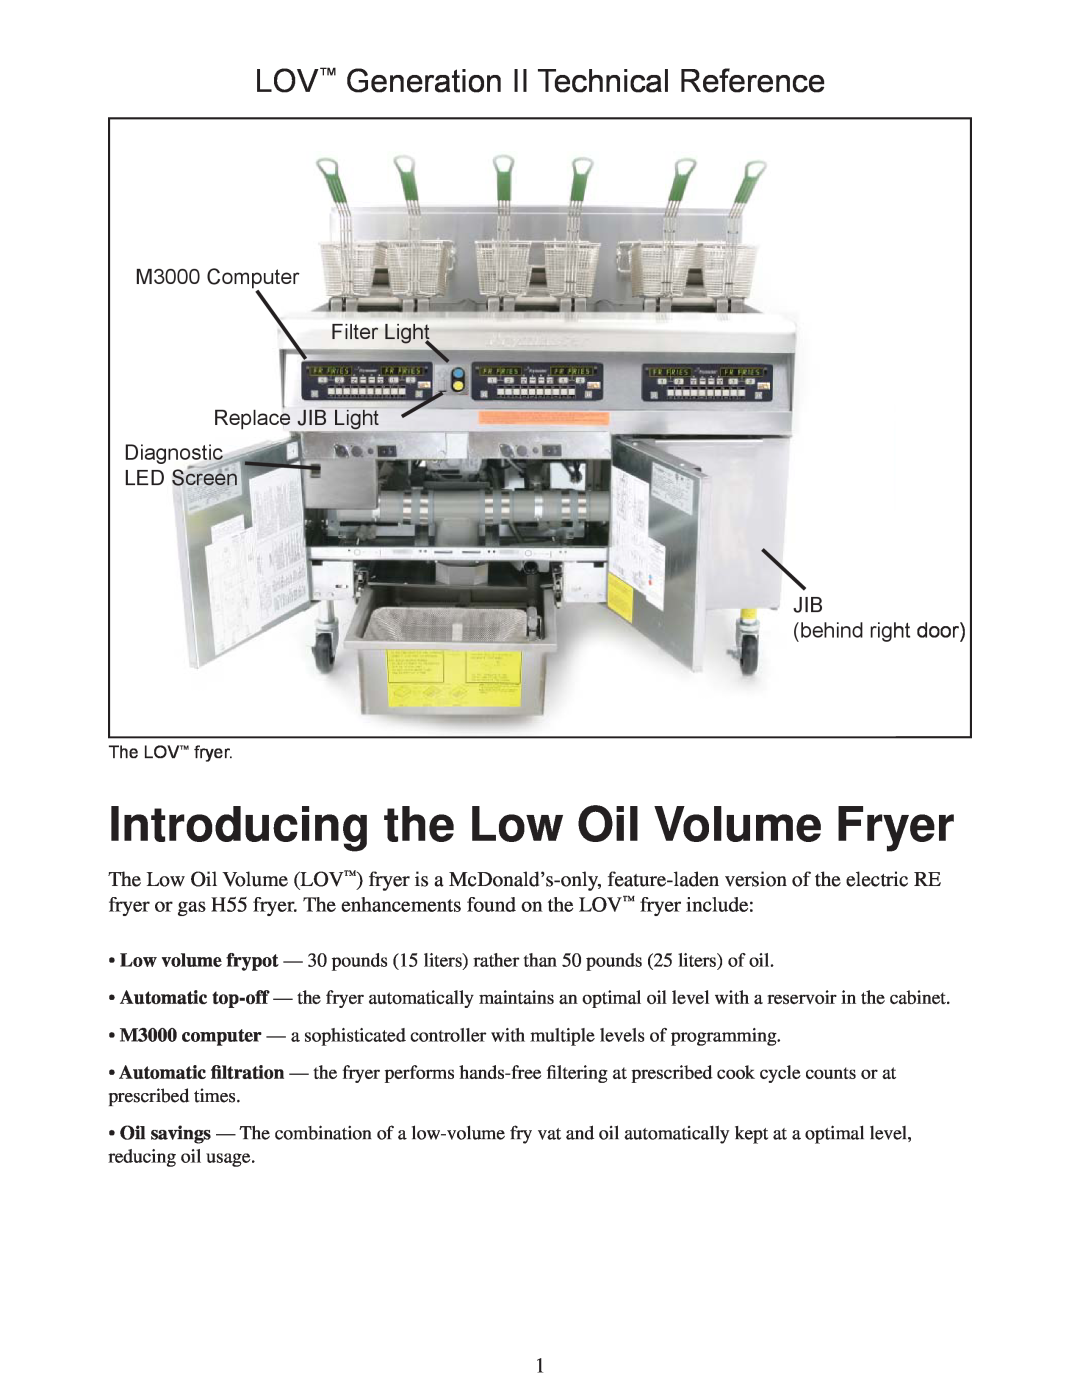 Frymaster M3000 manual Introducing the Low Oil Volume Fryer, LOV Generation II Technical Reference 